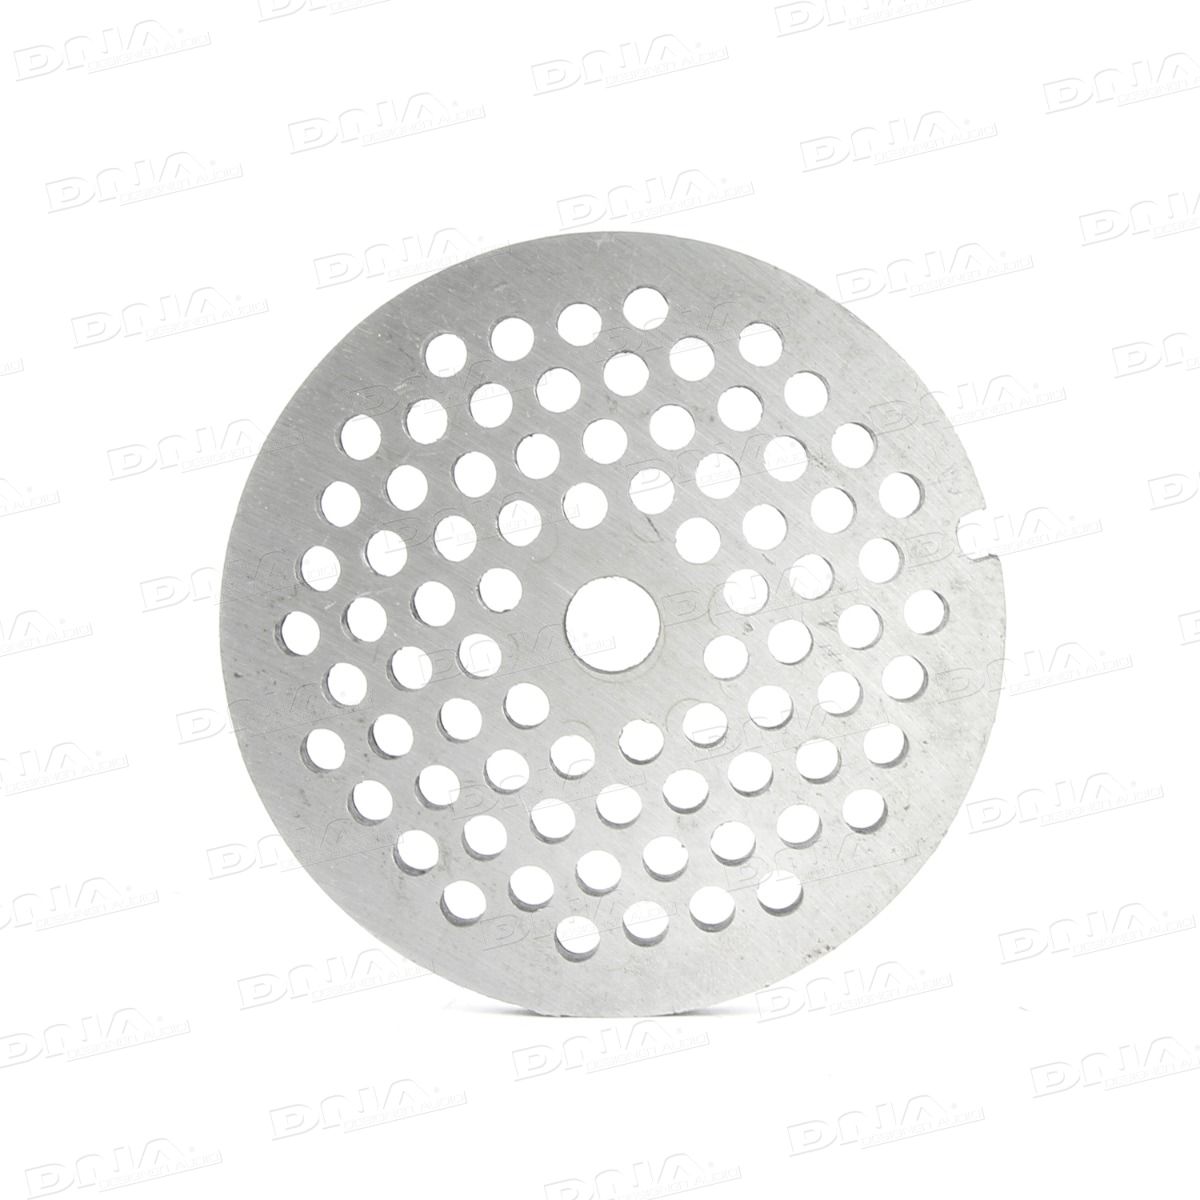 XXX MARINE BURLEY MINCER LARGE (SIZE 32) - 8mm DIAMETER HOLE CUTTING PLATE - REEL 'N' DEAL TACKLE